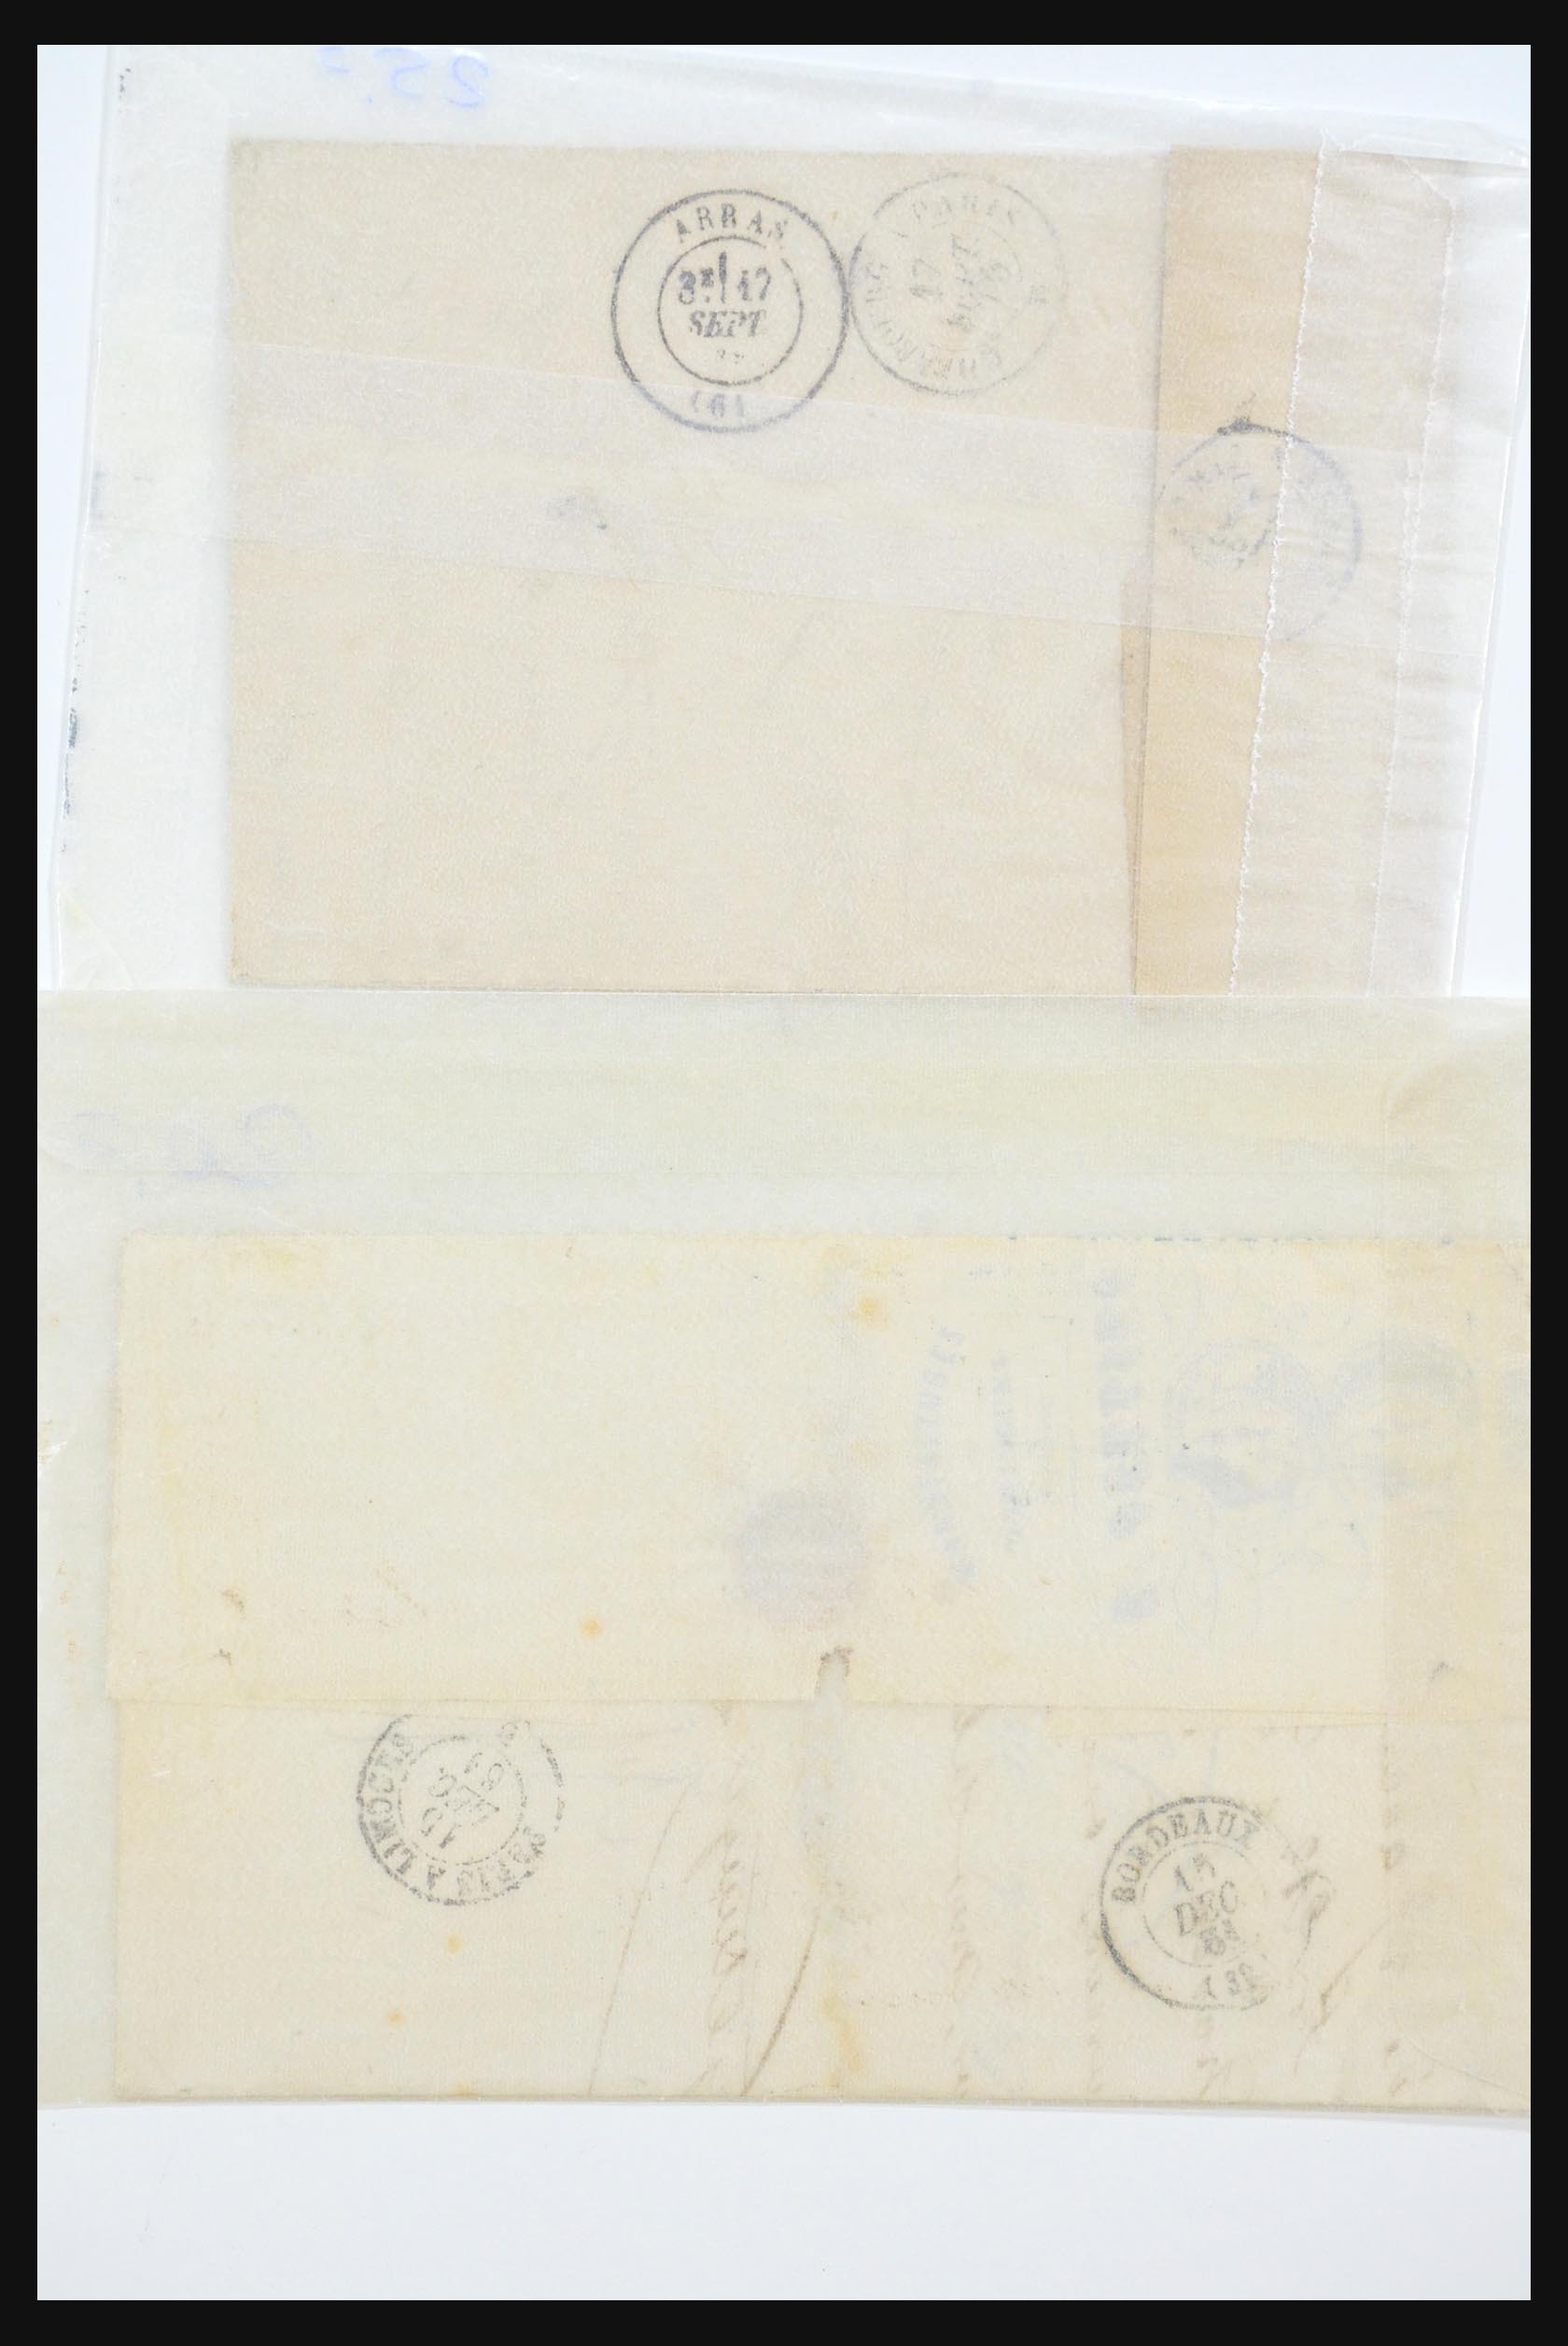 31359 0035 - 31359 France and Colonies covers 1770-1960.